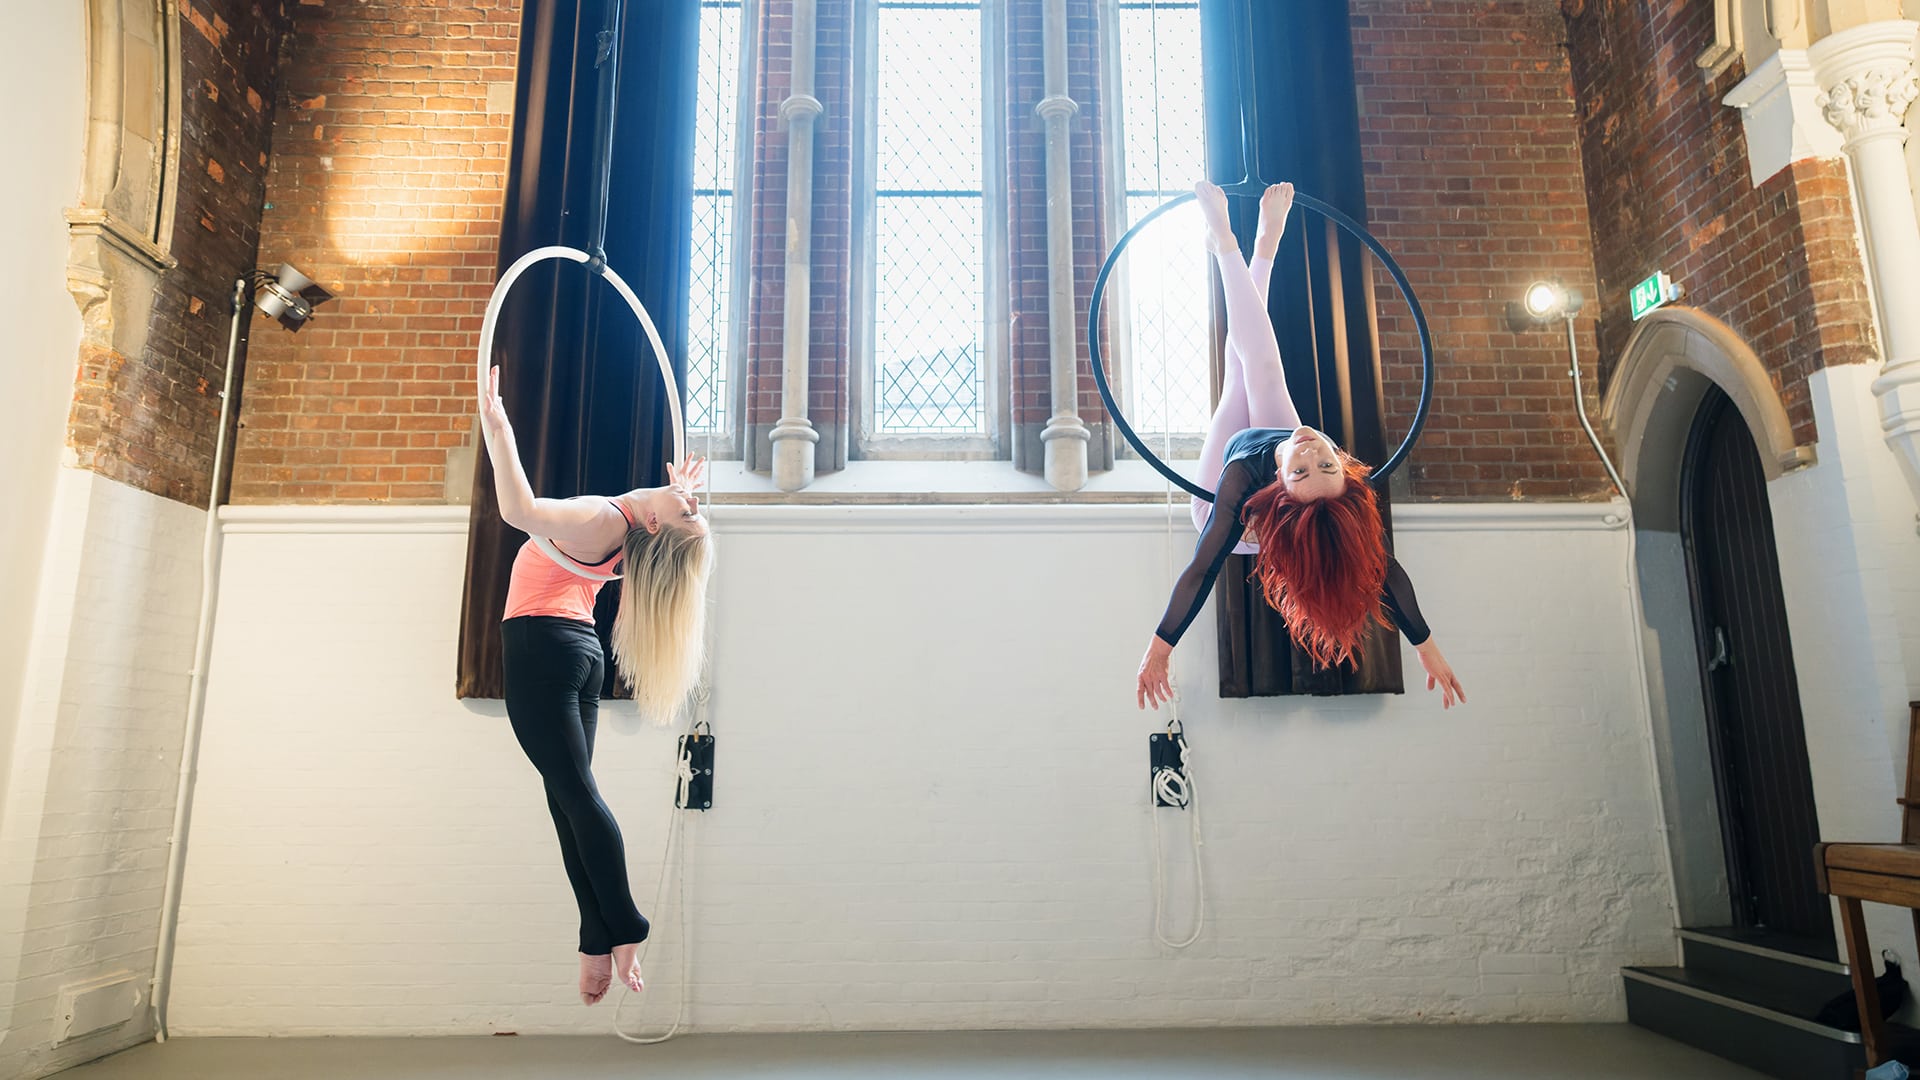 Two aerial artists hand from hoops in the rehearsal studio. One lies on her back in the hoop, her legs crossed above her, her long red hair hanging down. The other is in a back bend, her blonde hair flying out behind her